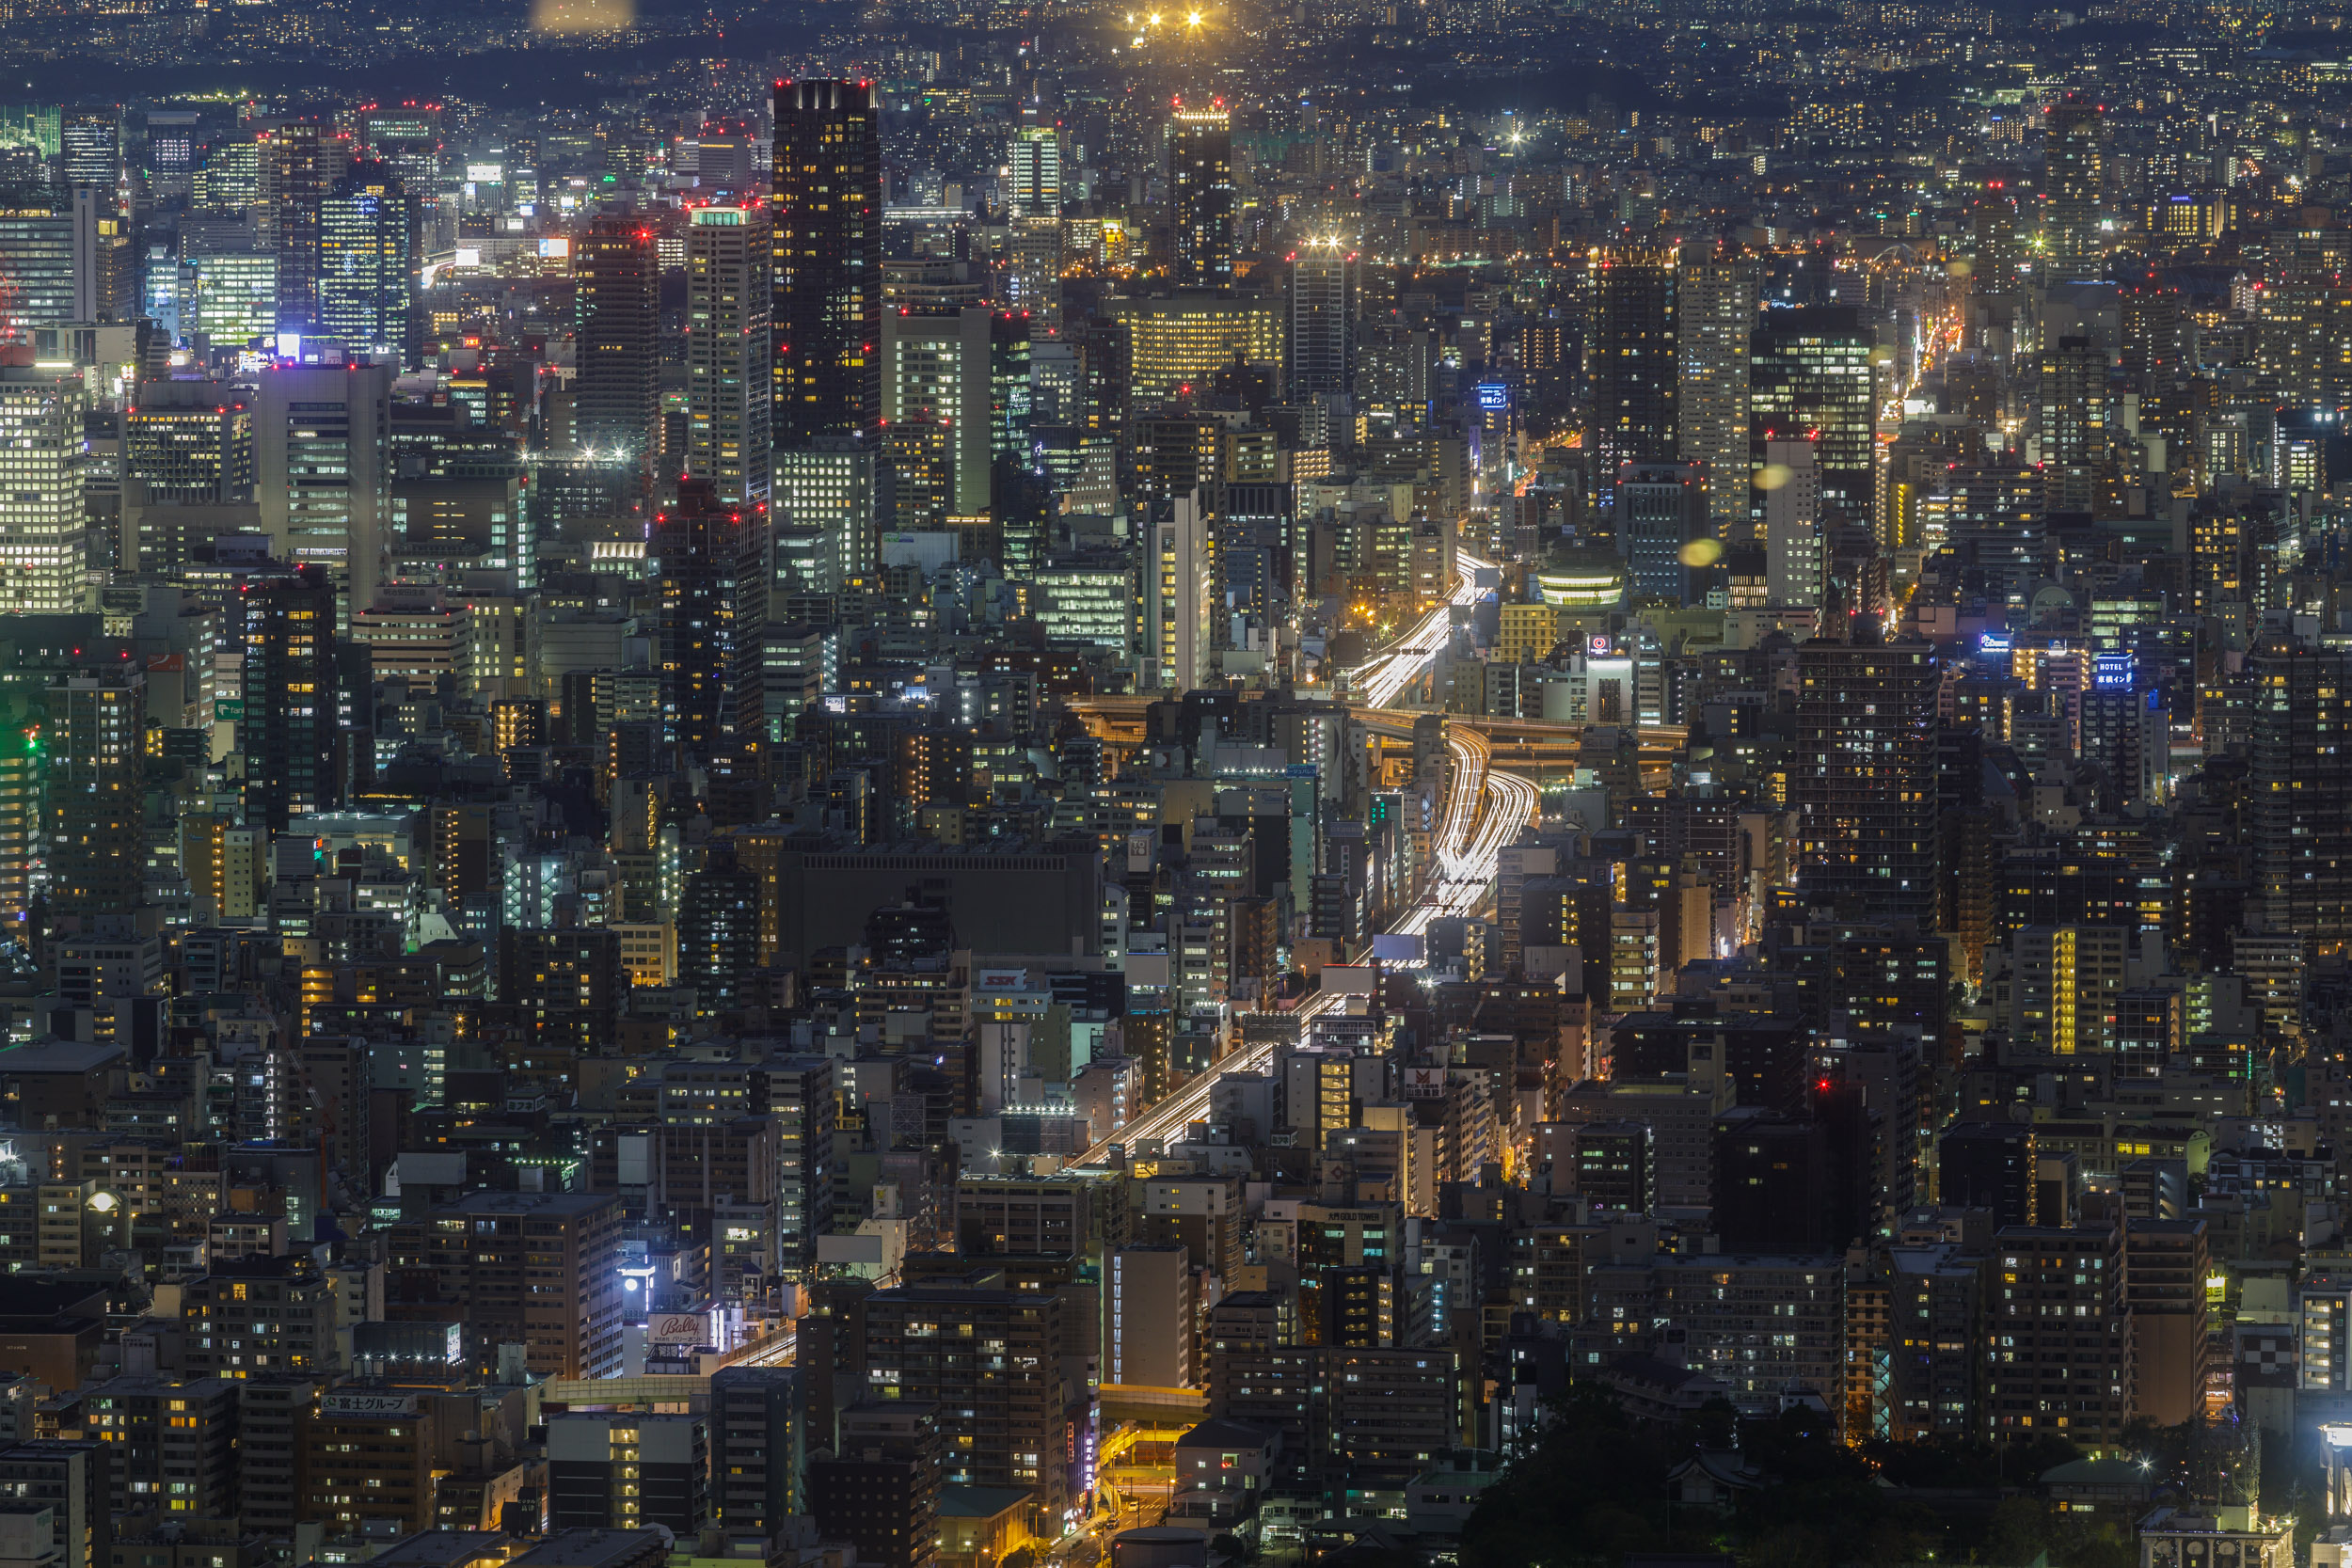 The cityscape of Osaka in Japan at night.